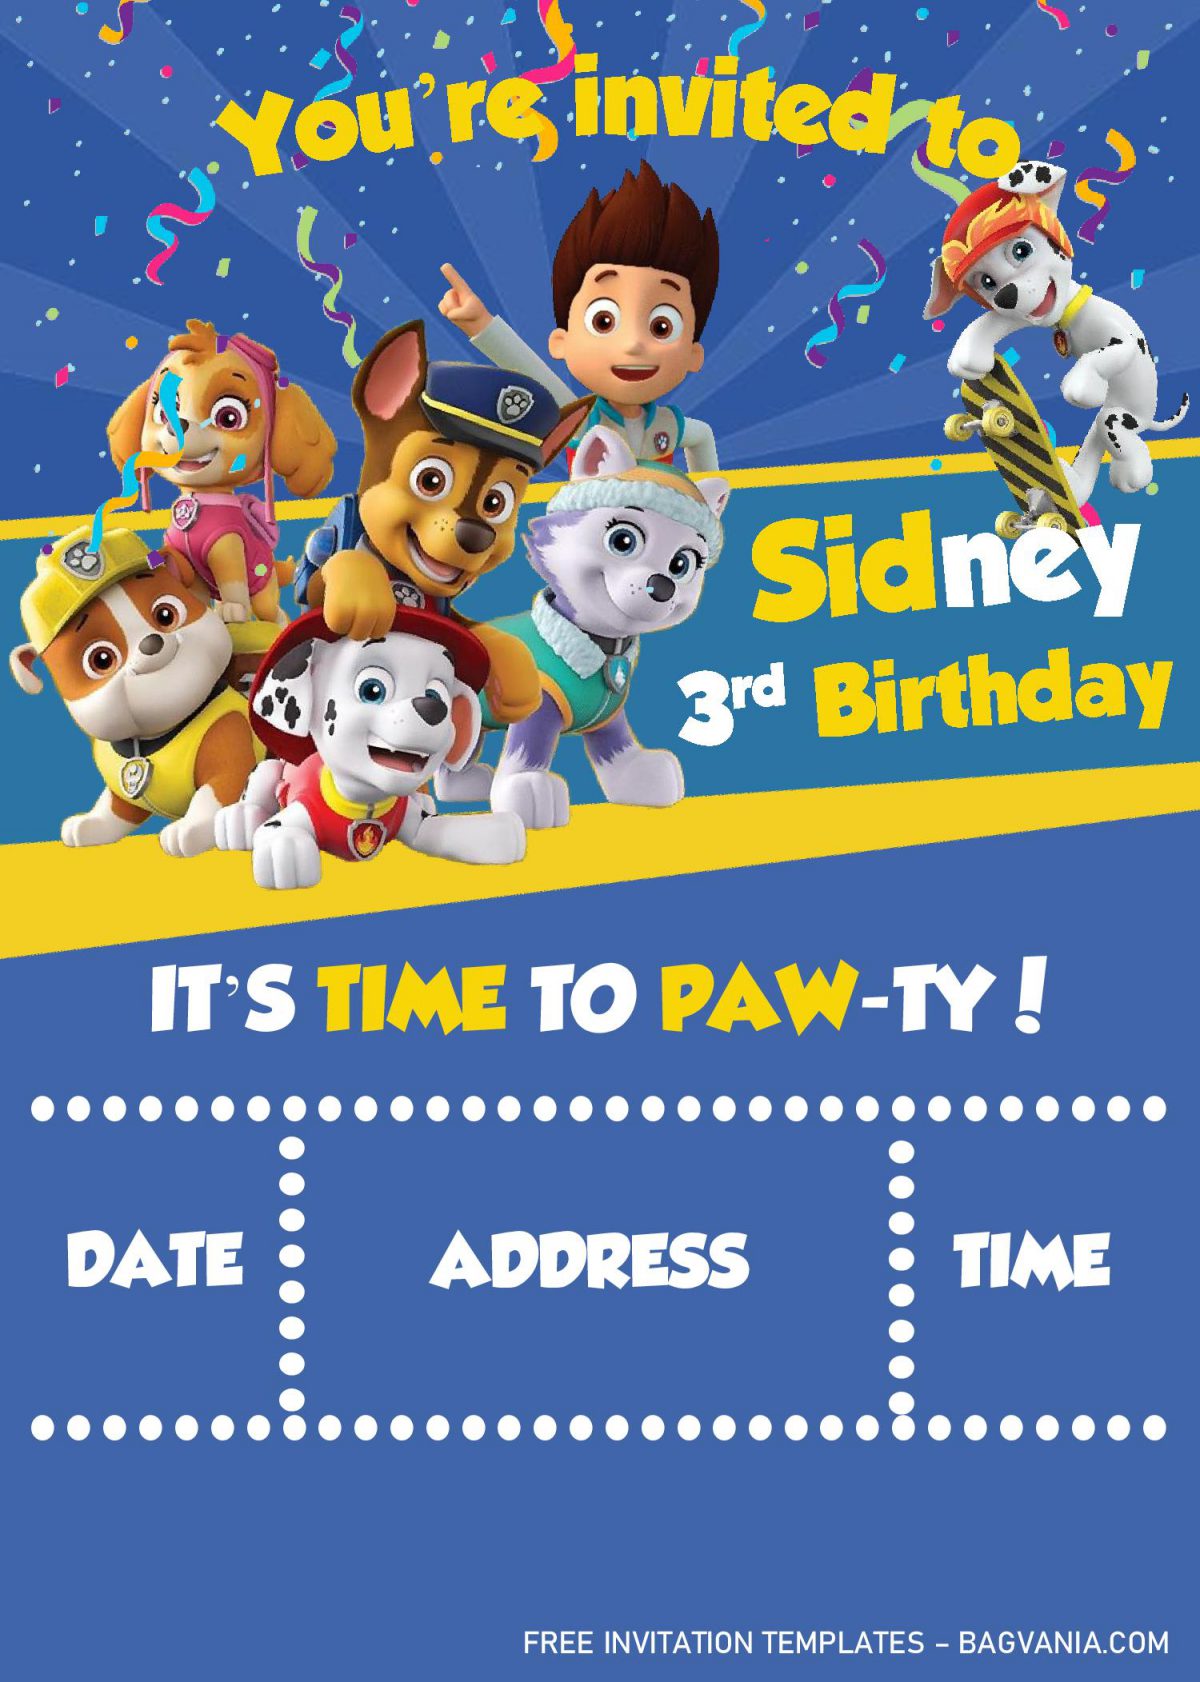 Paw Patrol Invitation Templates - Editable With MS Word and has all the cute characters